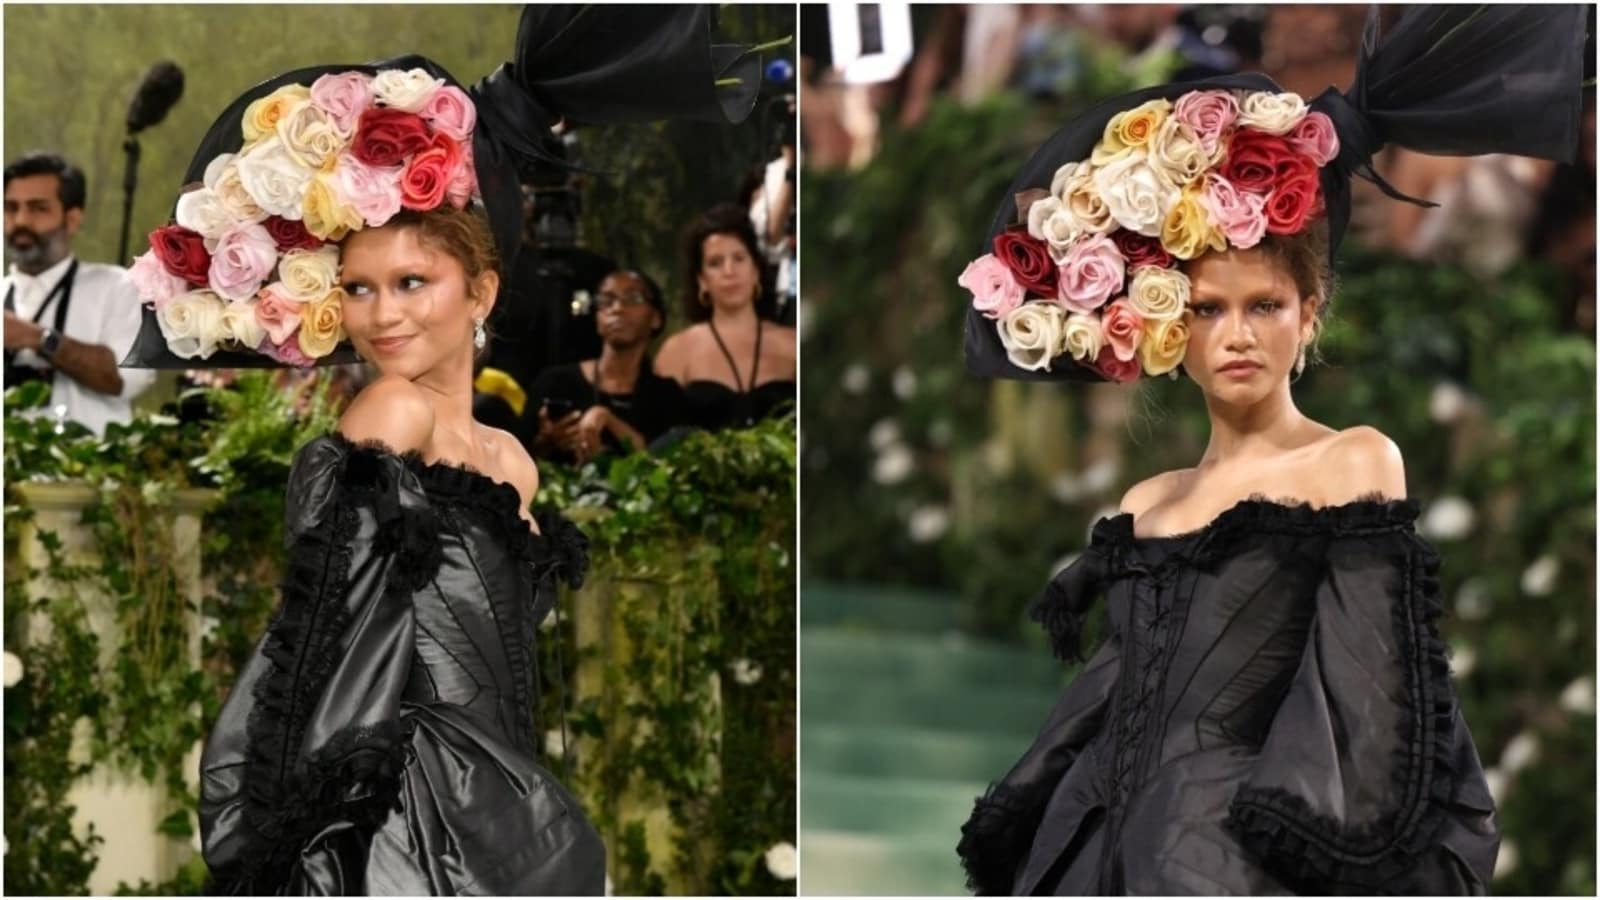 Zendaya's outfit change shuts down Met Gala red carpet; check out her dramatic black gown and giant floral headpiece - Hindustan Times